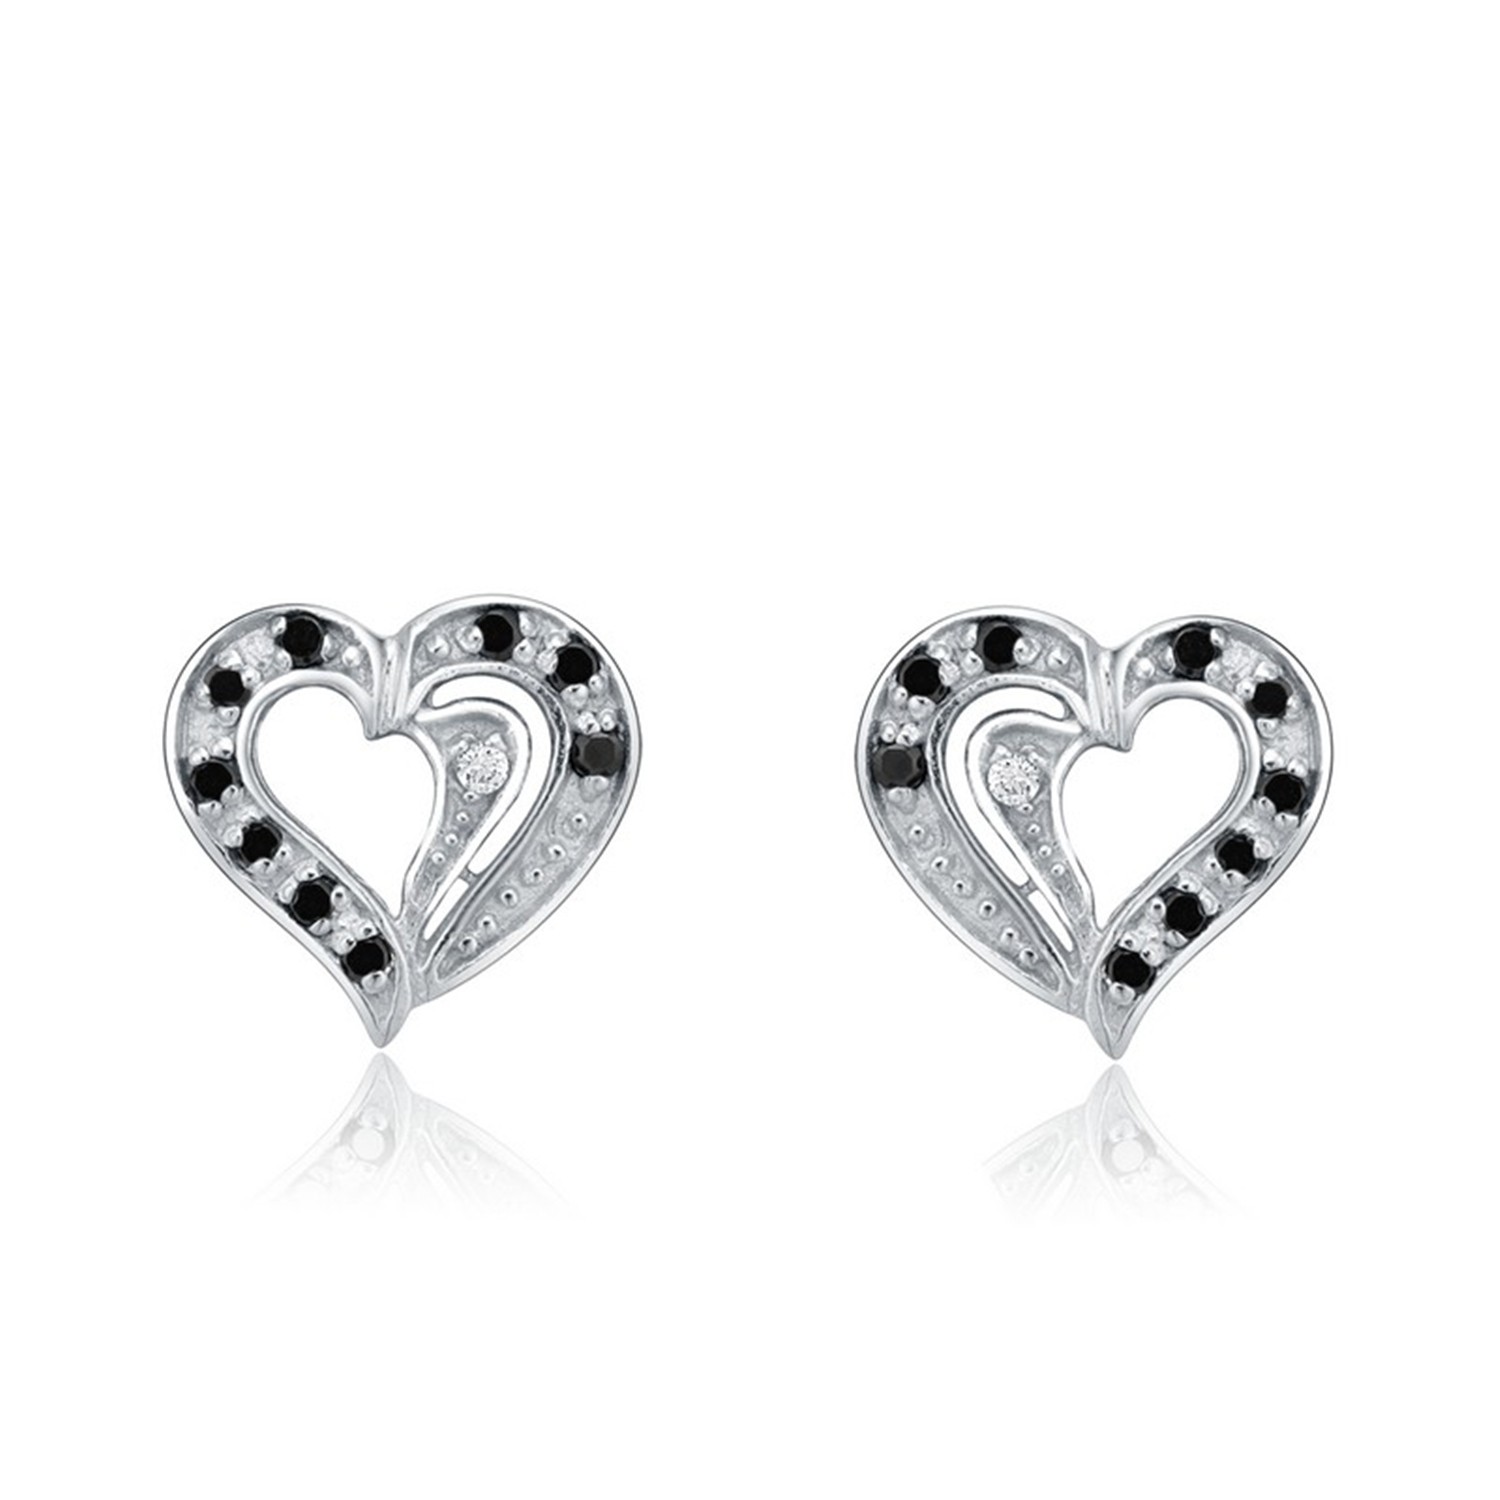 Fashionable Trendy 925 Sterling Silver Heart Shape White And Black CZ Stud Earrings